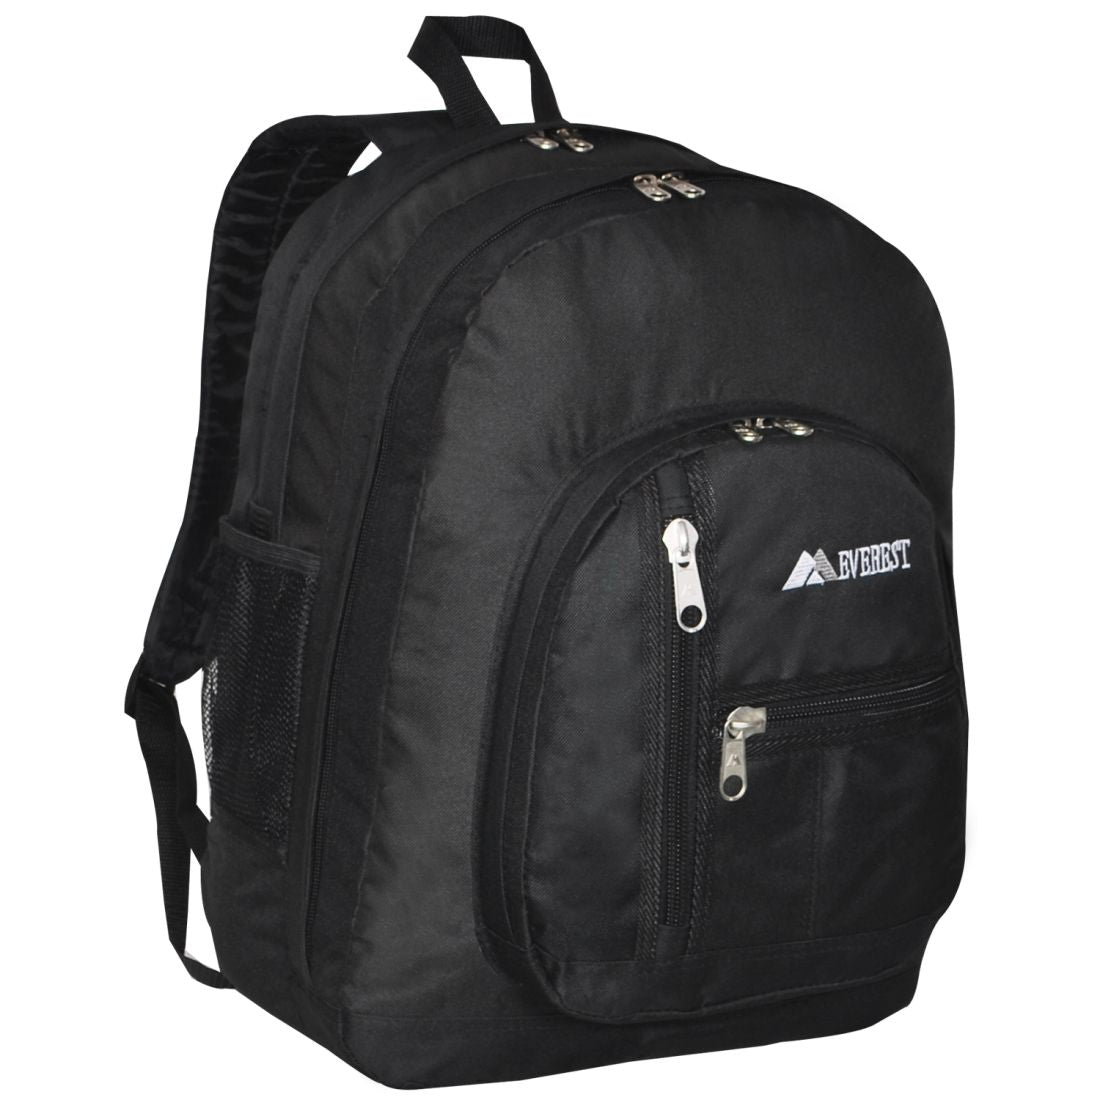 Everest mid-size Double Compartment Backpack with cargo room. 